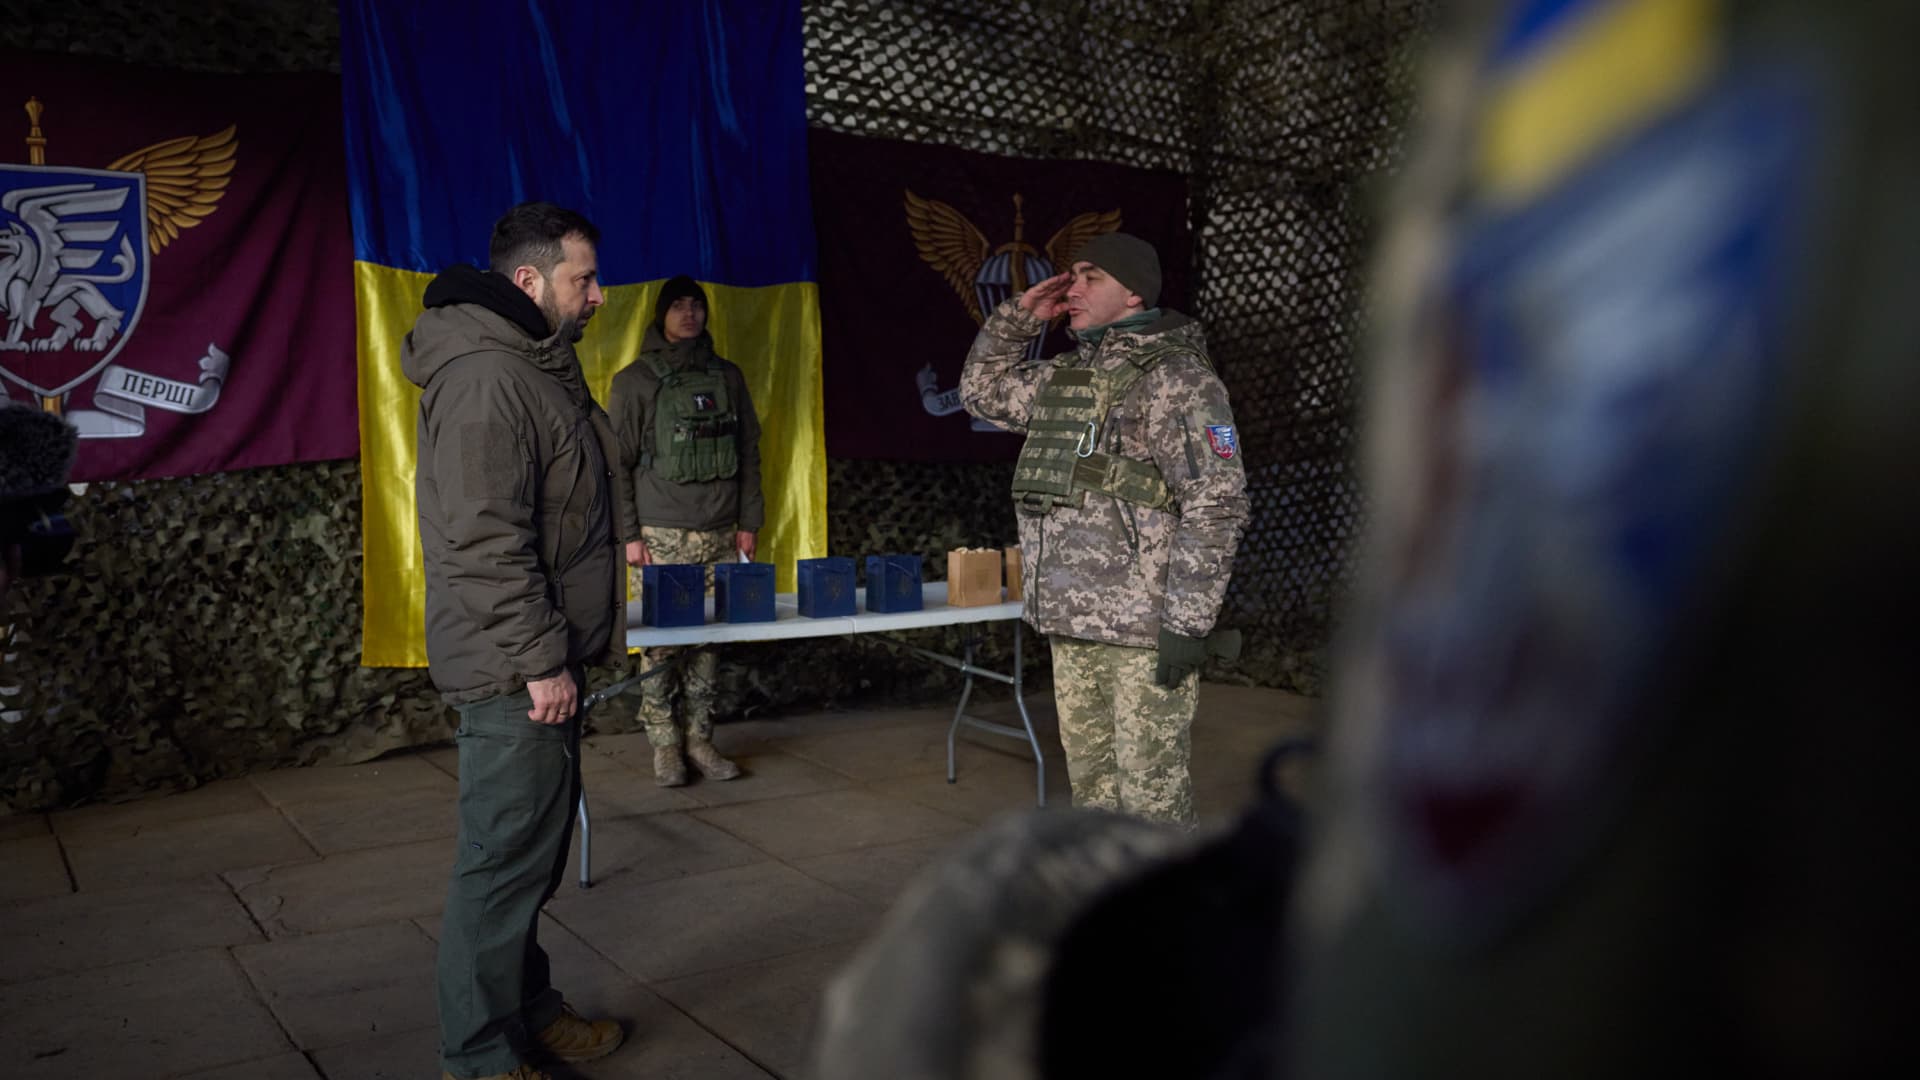 Ukrainian President, Volodymyr Zelenskyy visits Donetsk front, where the most violent clashes in the war with Russia took place in Ukraine on December 06, 2022. (Photo by Ukrainian Presidency / Handout/Anadolu Agency via Getty Images)